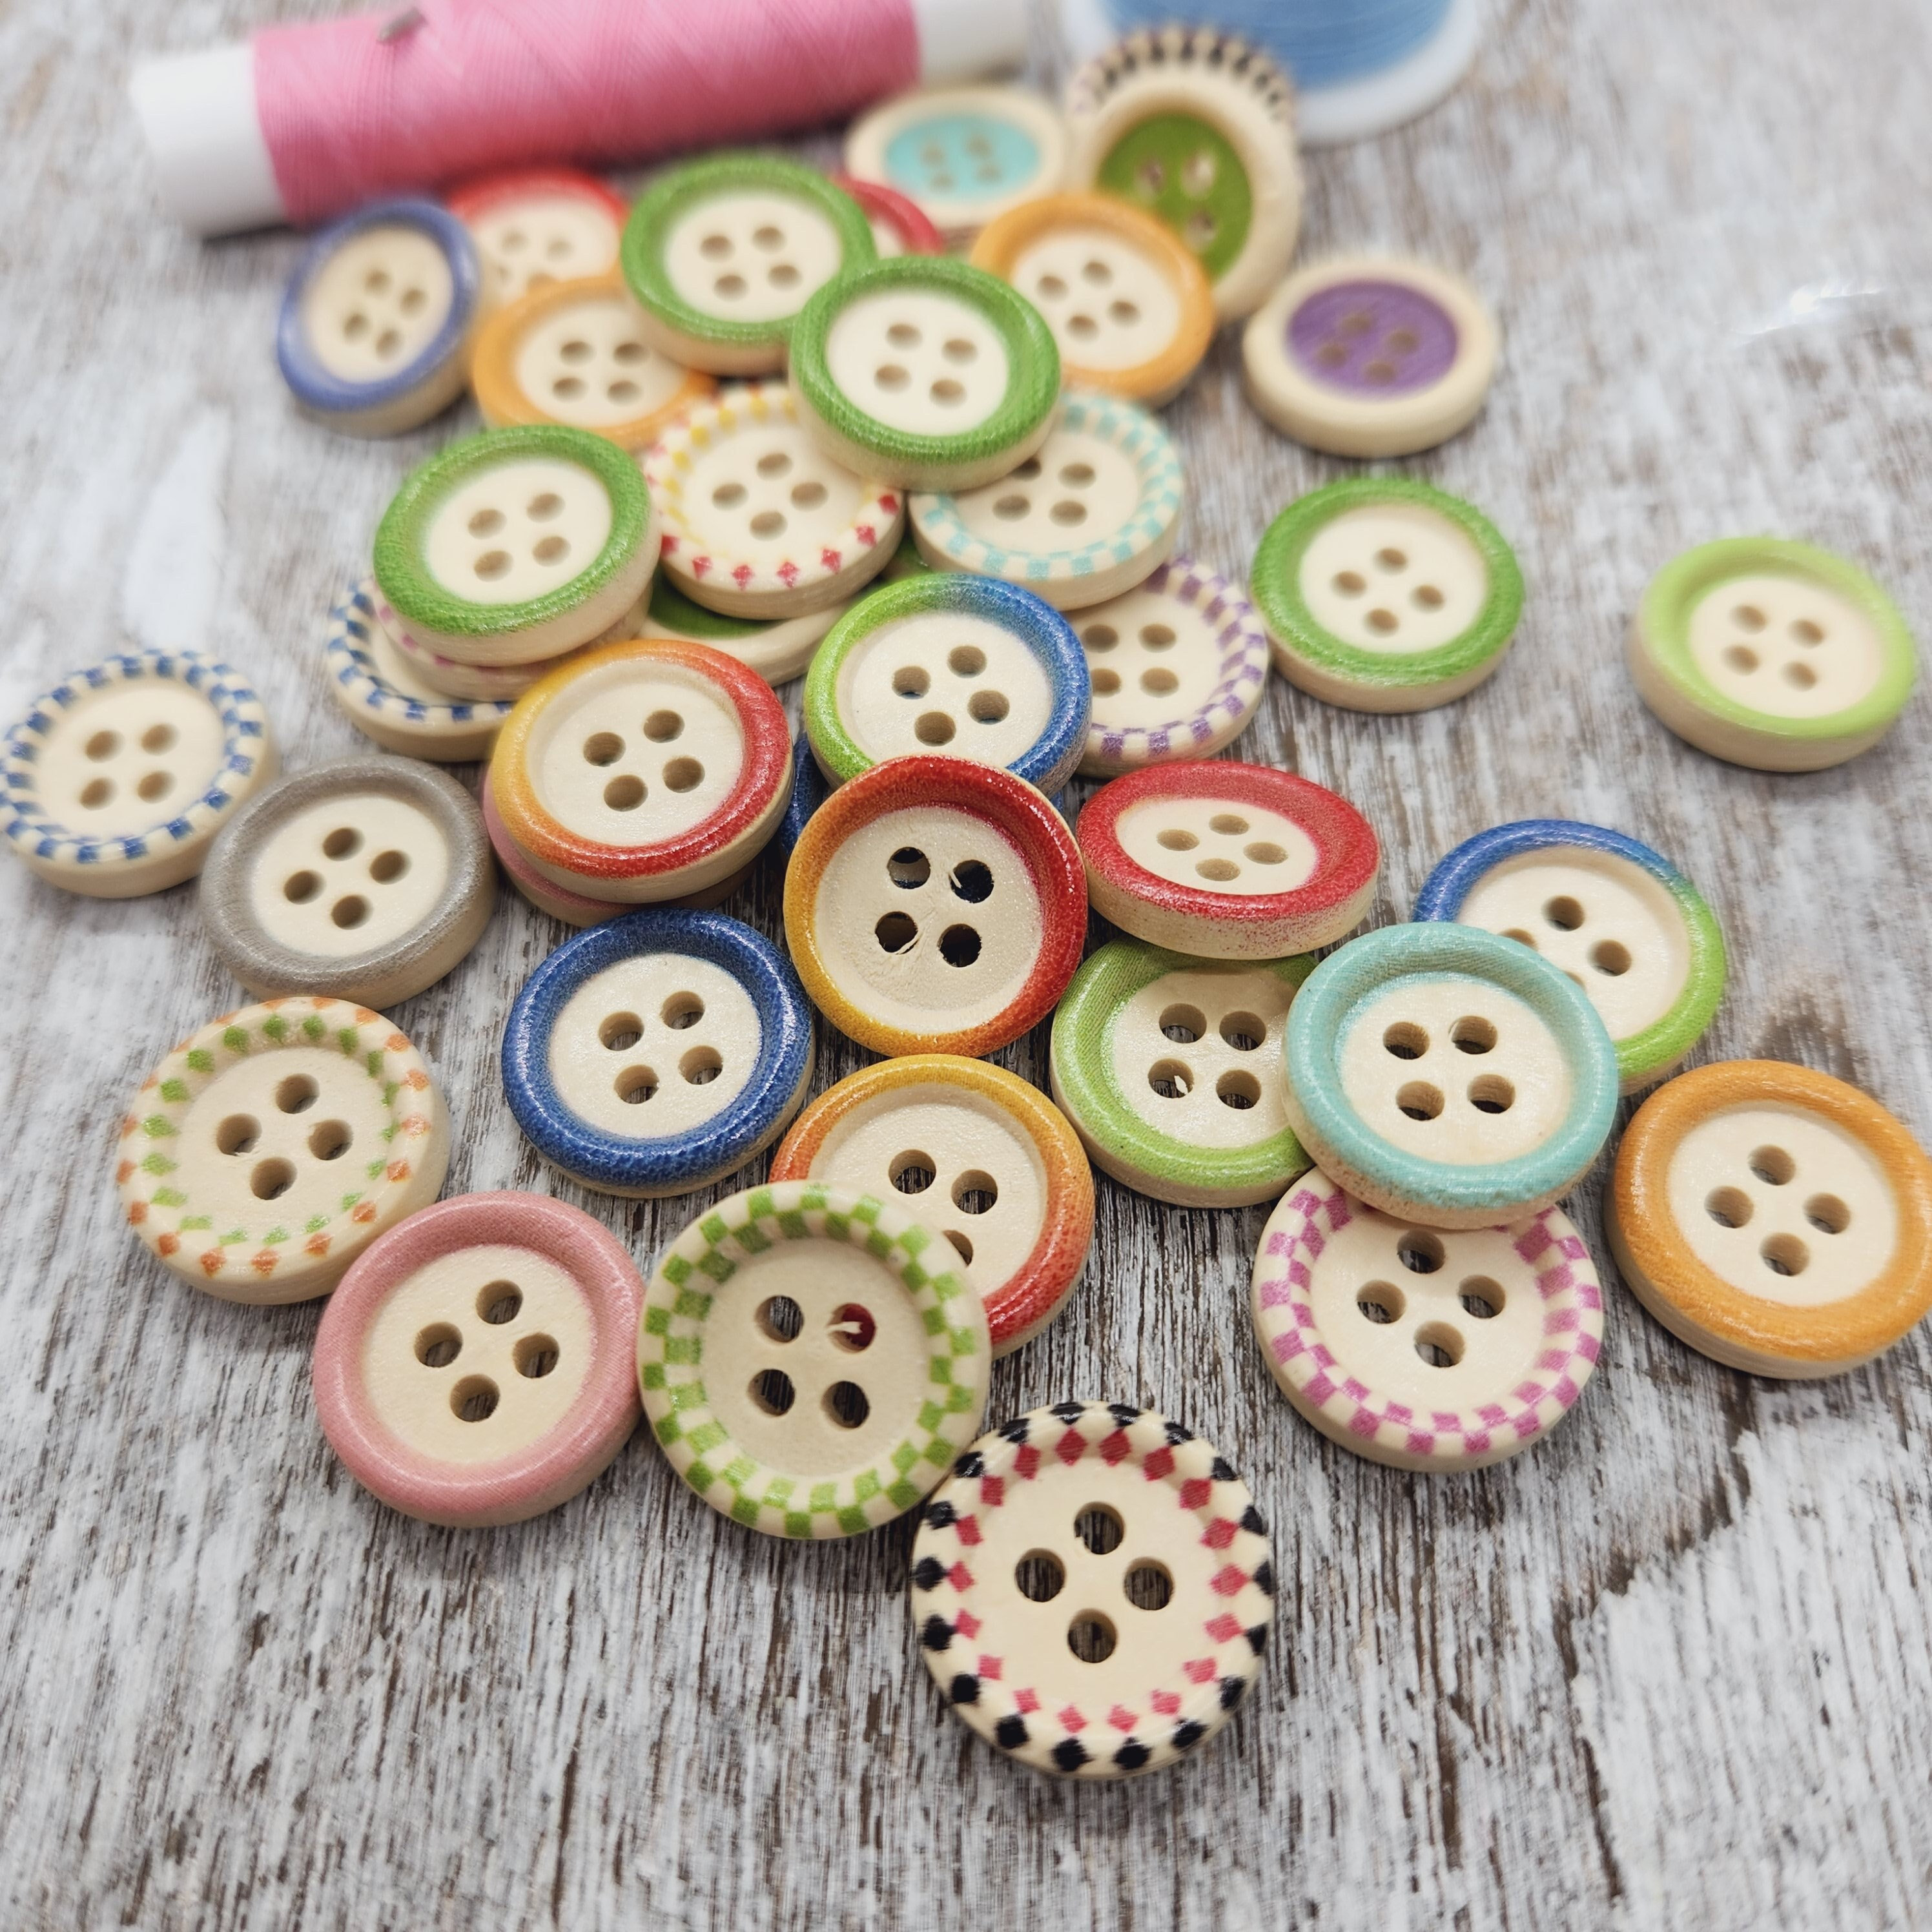 Wooden Buttons - Round Wood Buttons for Crafts Sewing Sweater by Mandala  Crafts, Natural Color Bulk 30 PCs 30mm 1.25 Inch Button with 4 Holes 